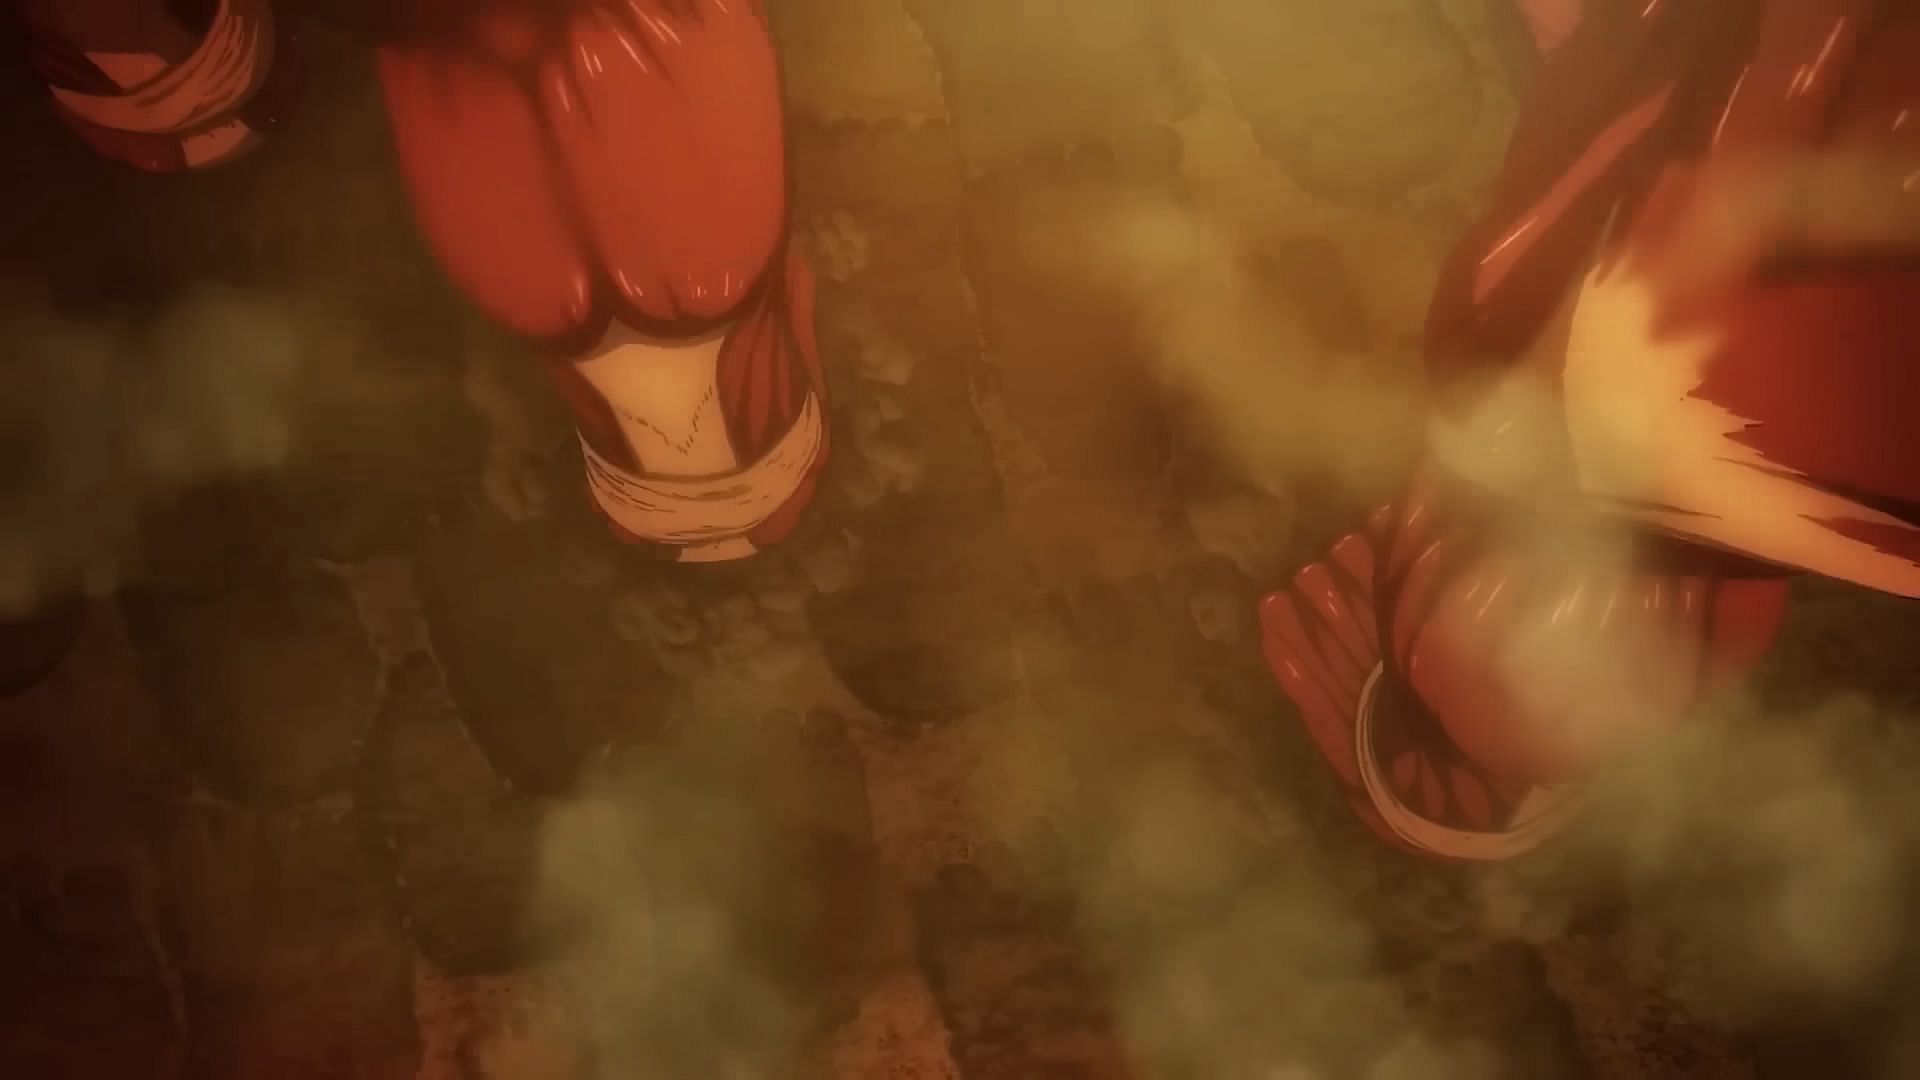 17. Part 3 of Thoughts on the “Attack on Titan” Season 4 Trailer